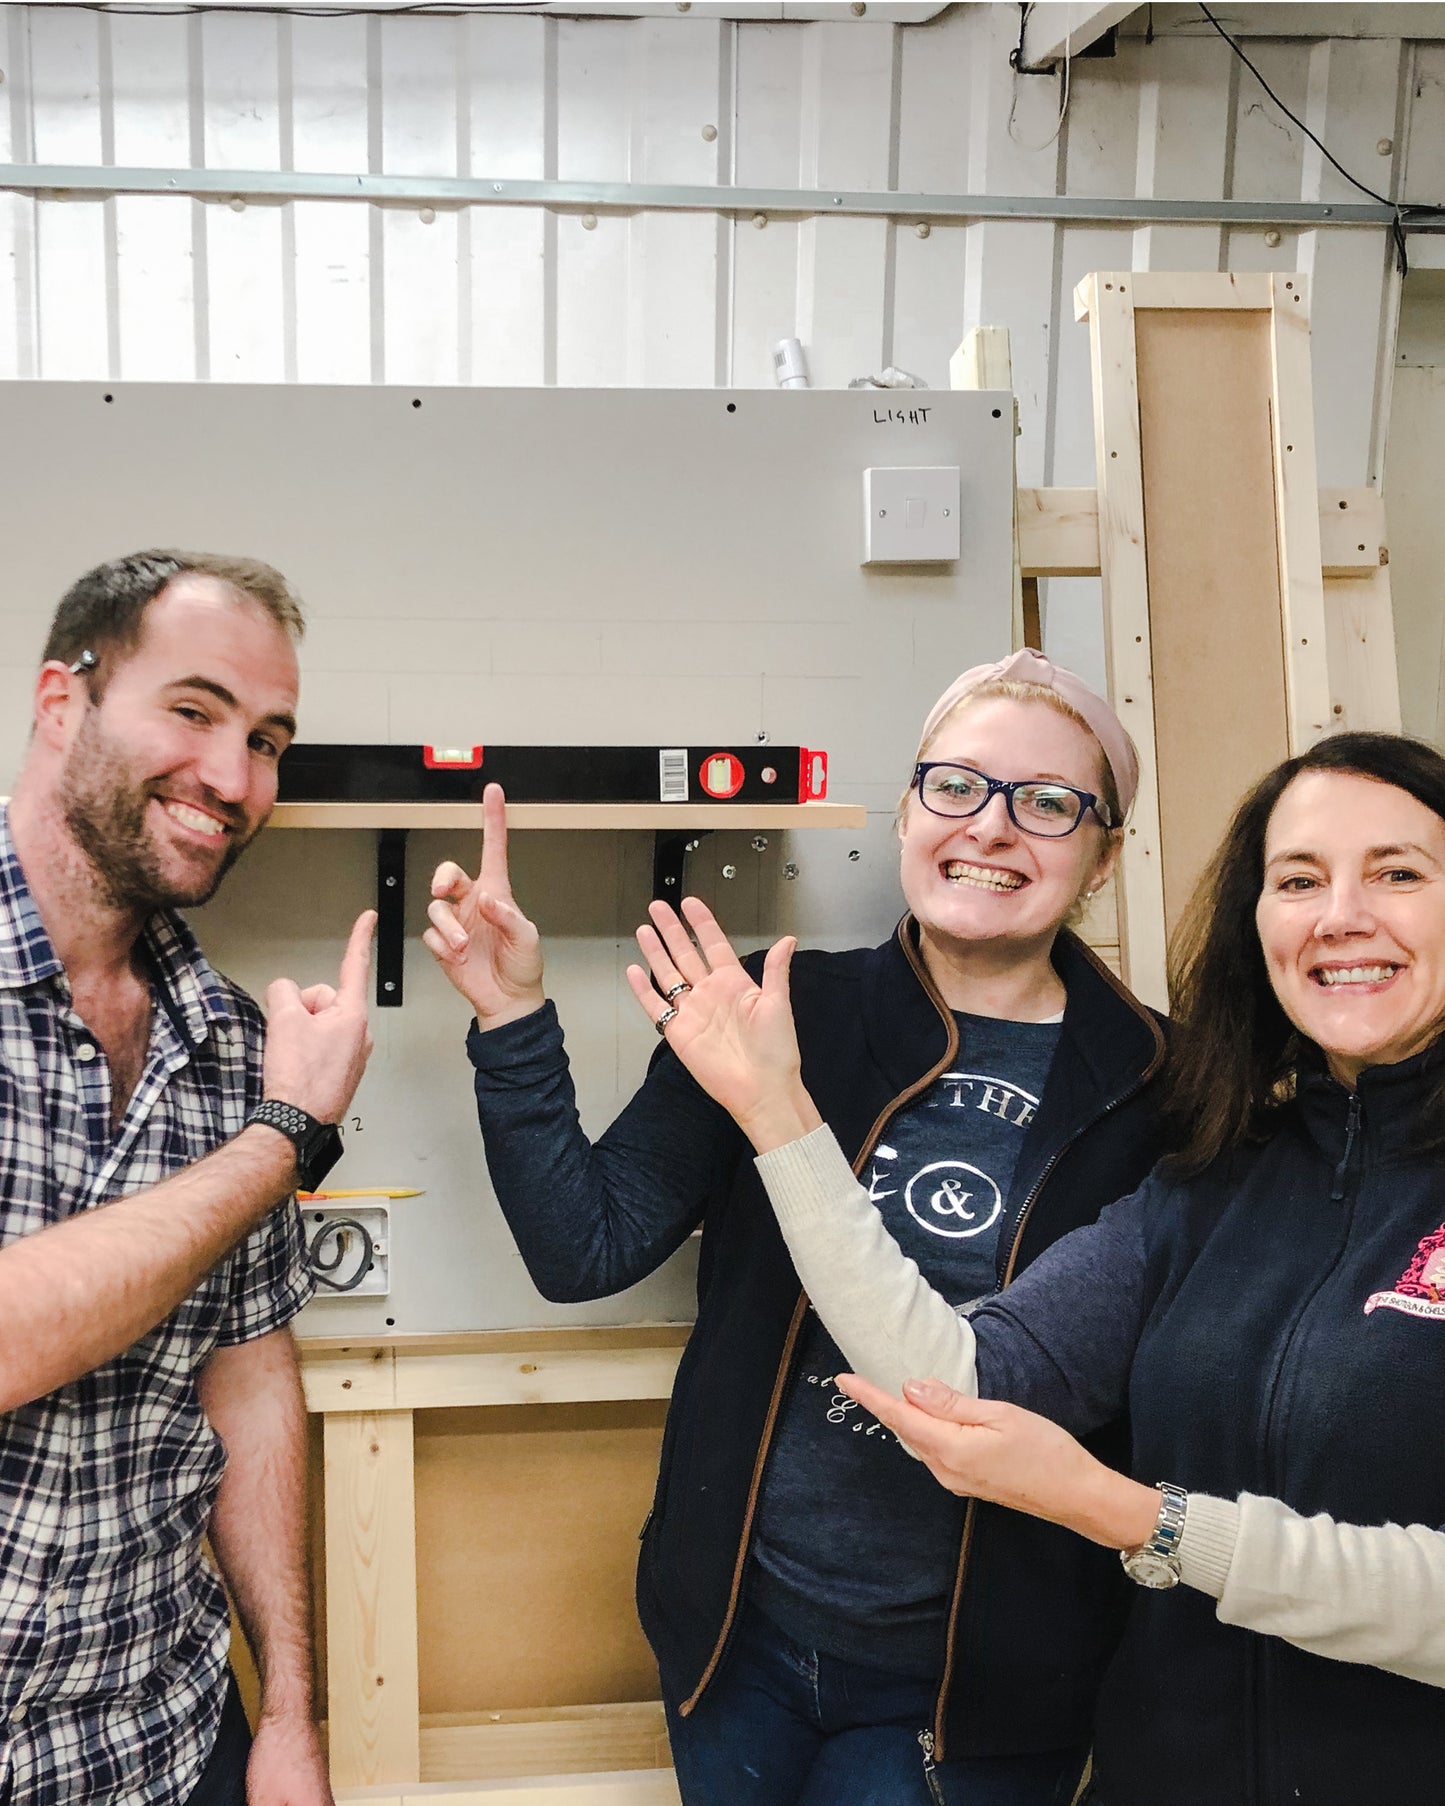 Join the 'Shelfie Wall of Fame' with an Ash & Co. DIY in a Day workshop